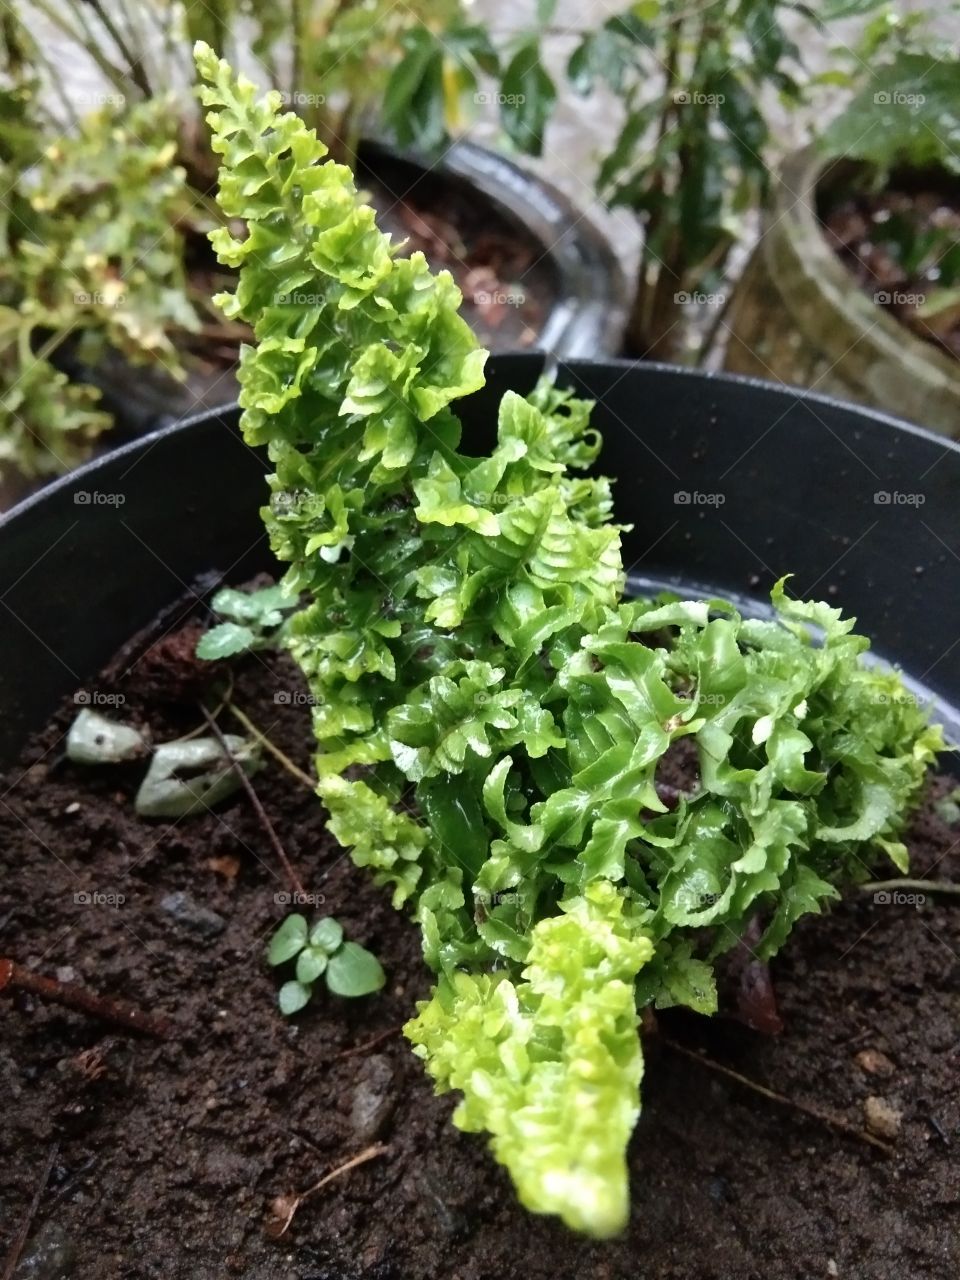 wavy green leaves in the pot